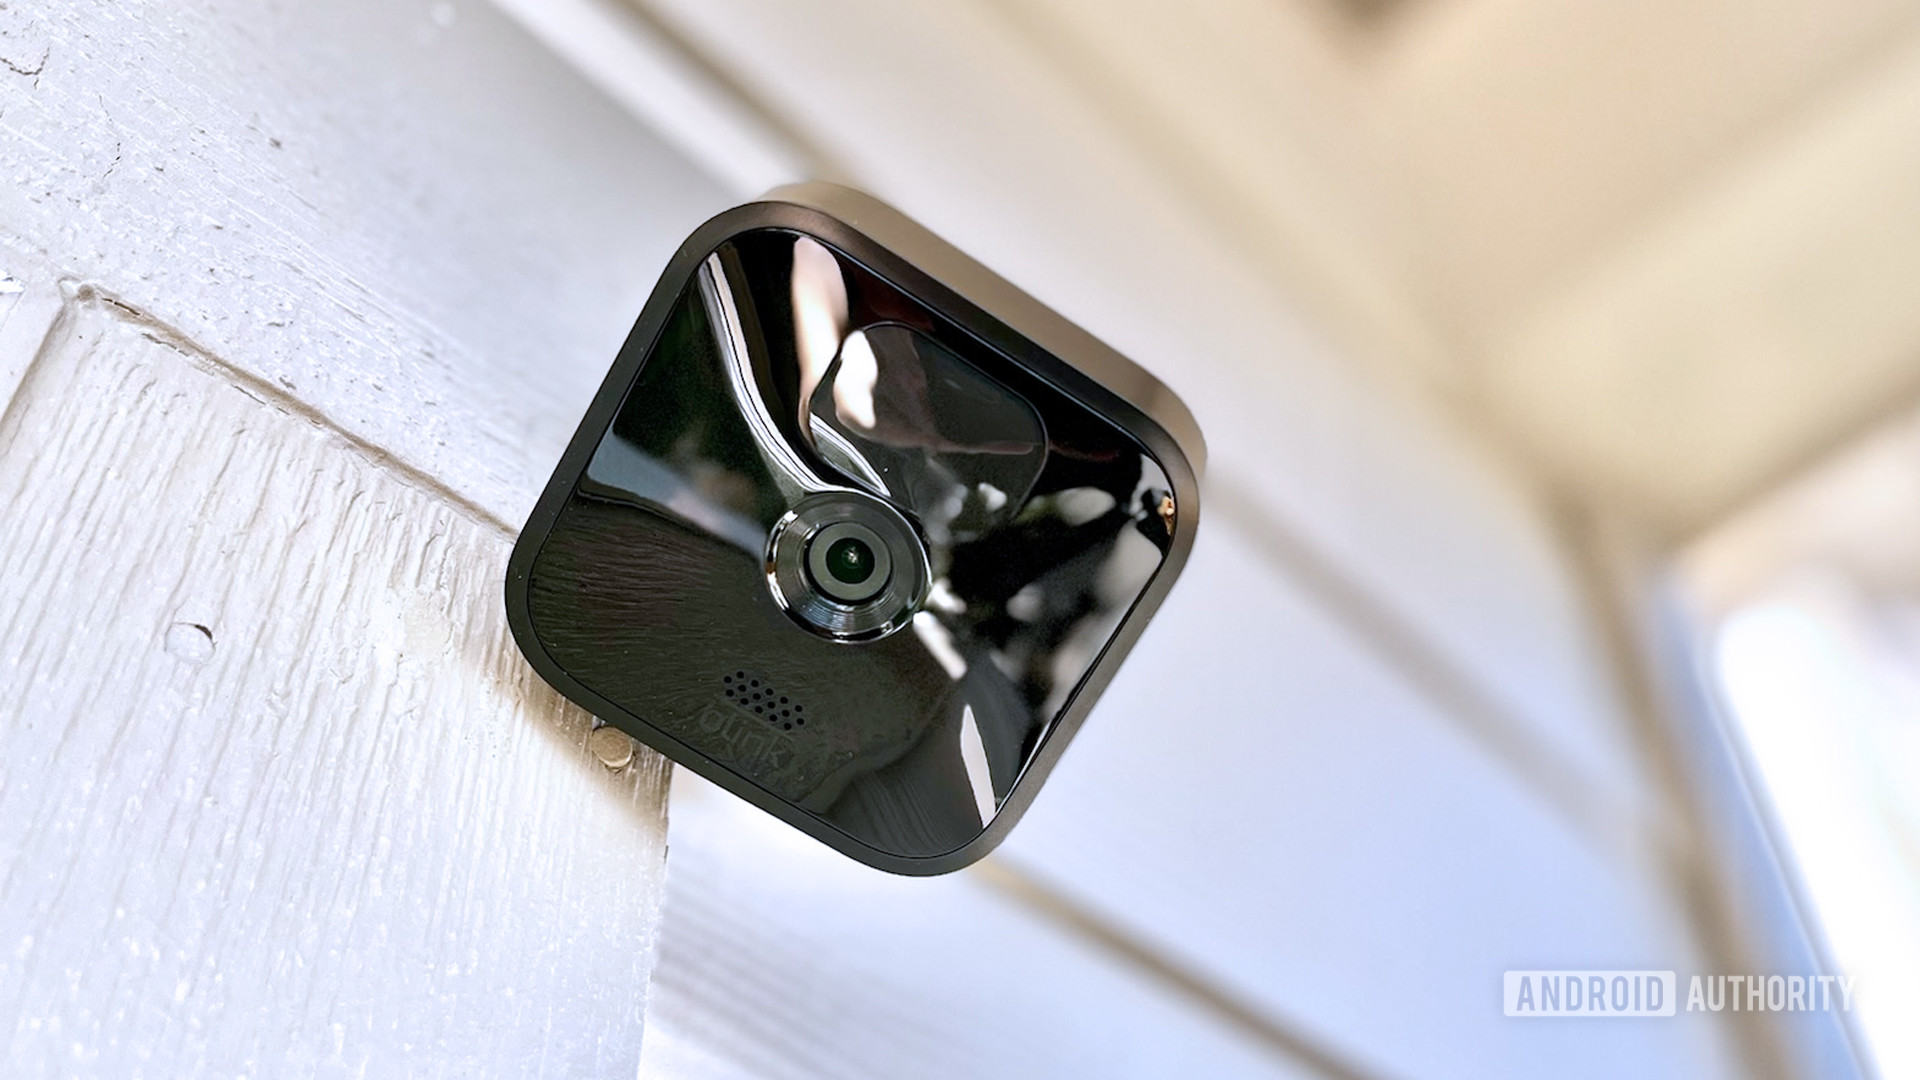 The Blink Outdoor camera from below